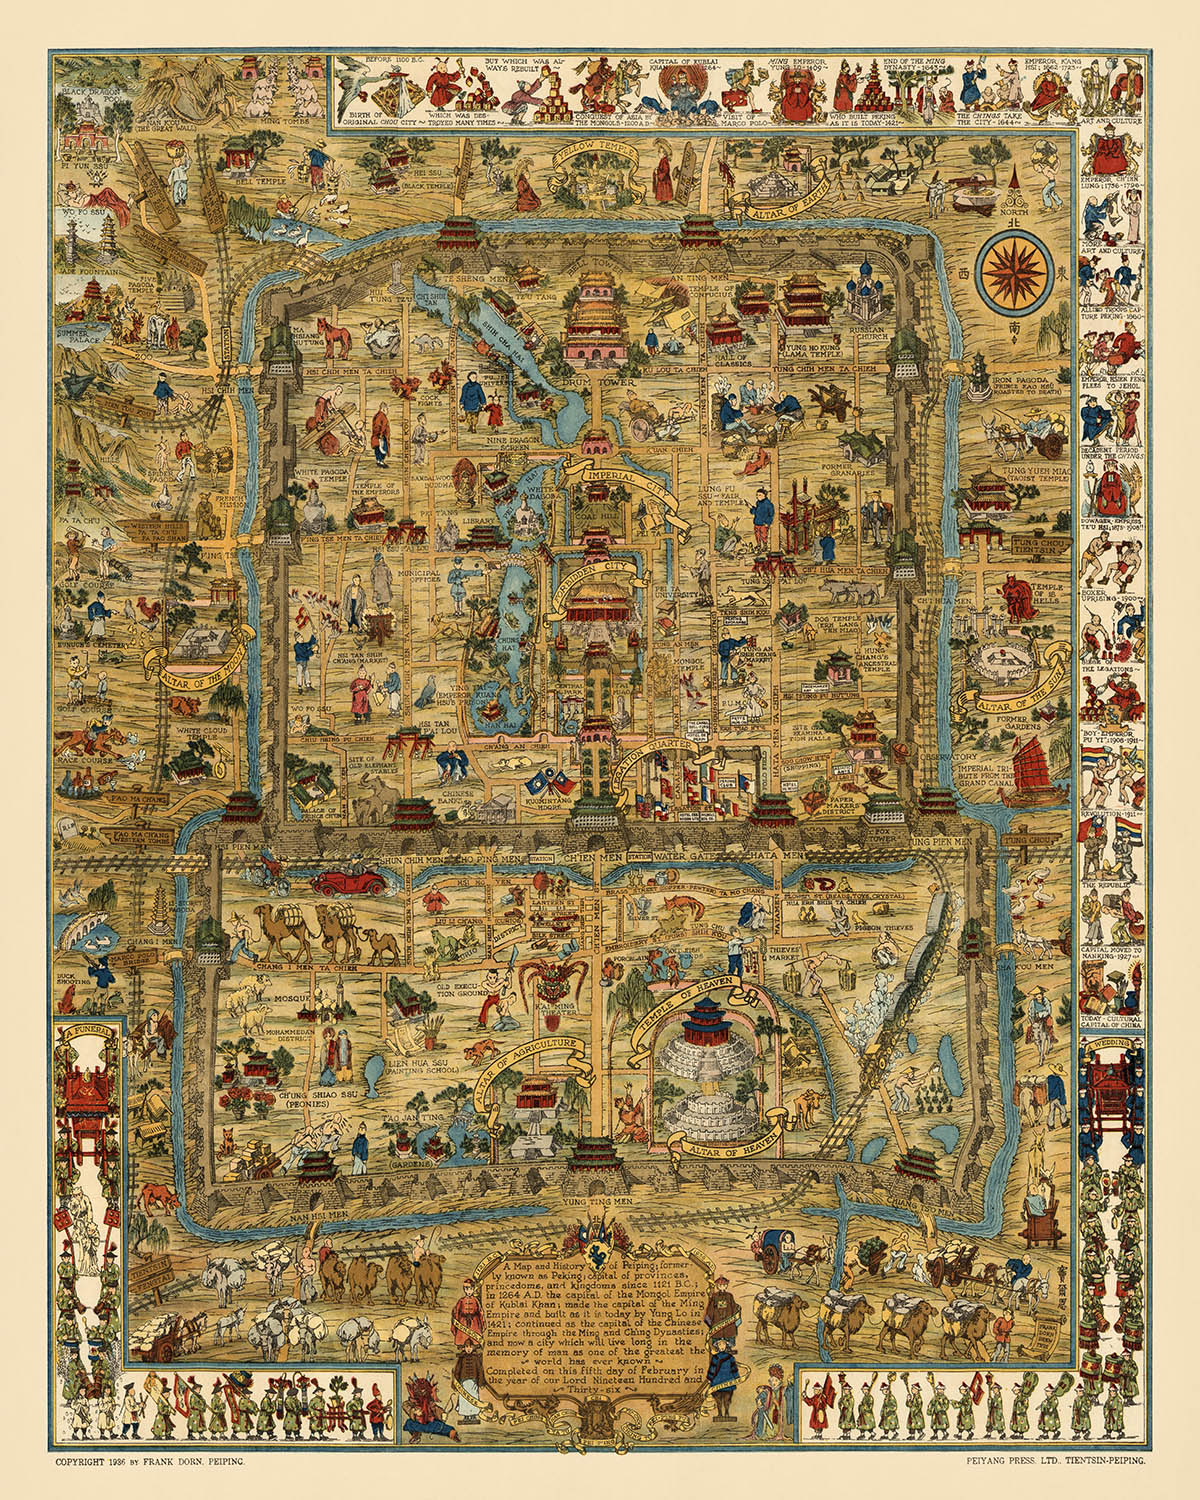 Old Pictorial Map of Beijing by Dorn, 1936: Forbidden City, Temple of Heaven, Summer Palace, Ming Tombs, Great Wall